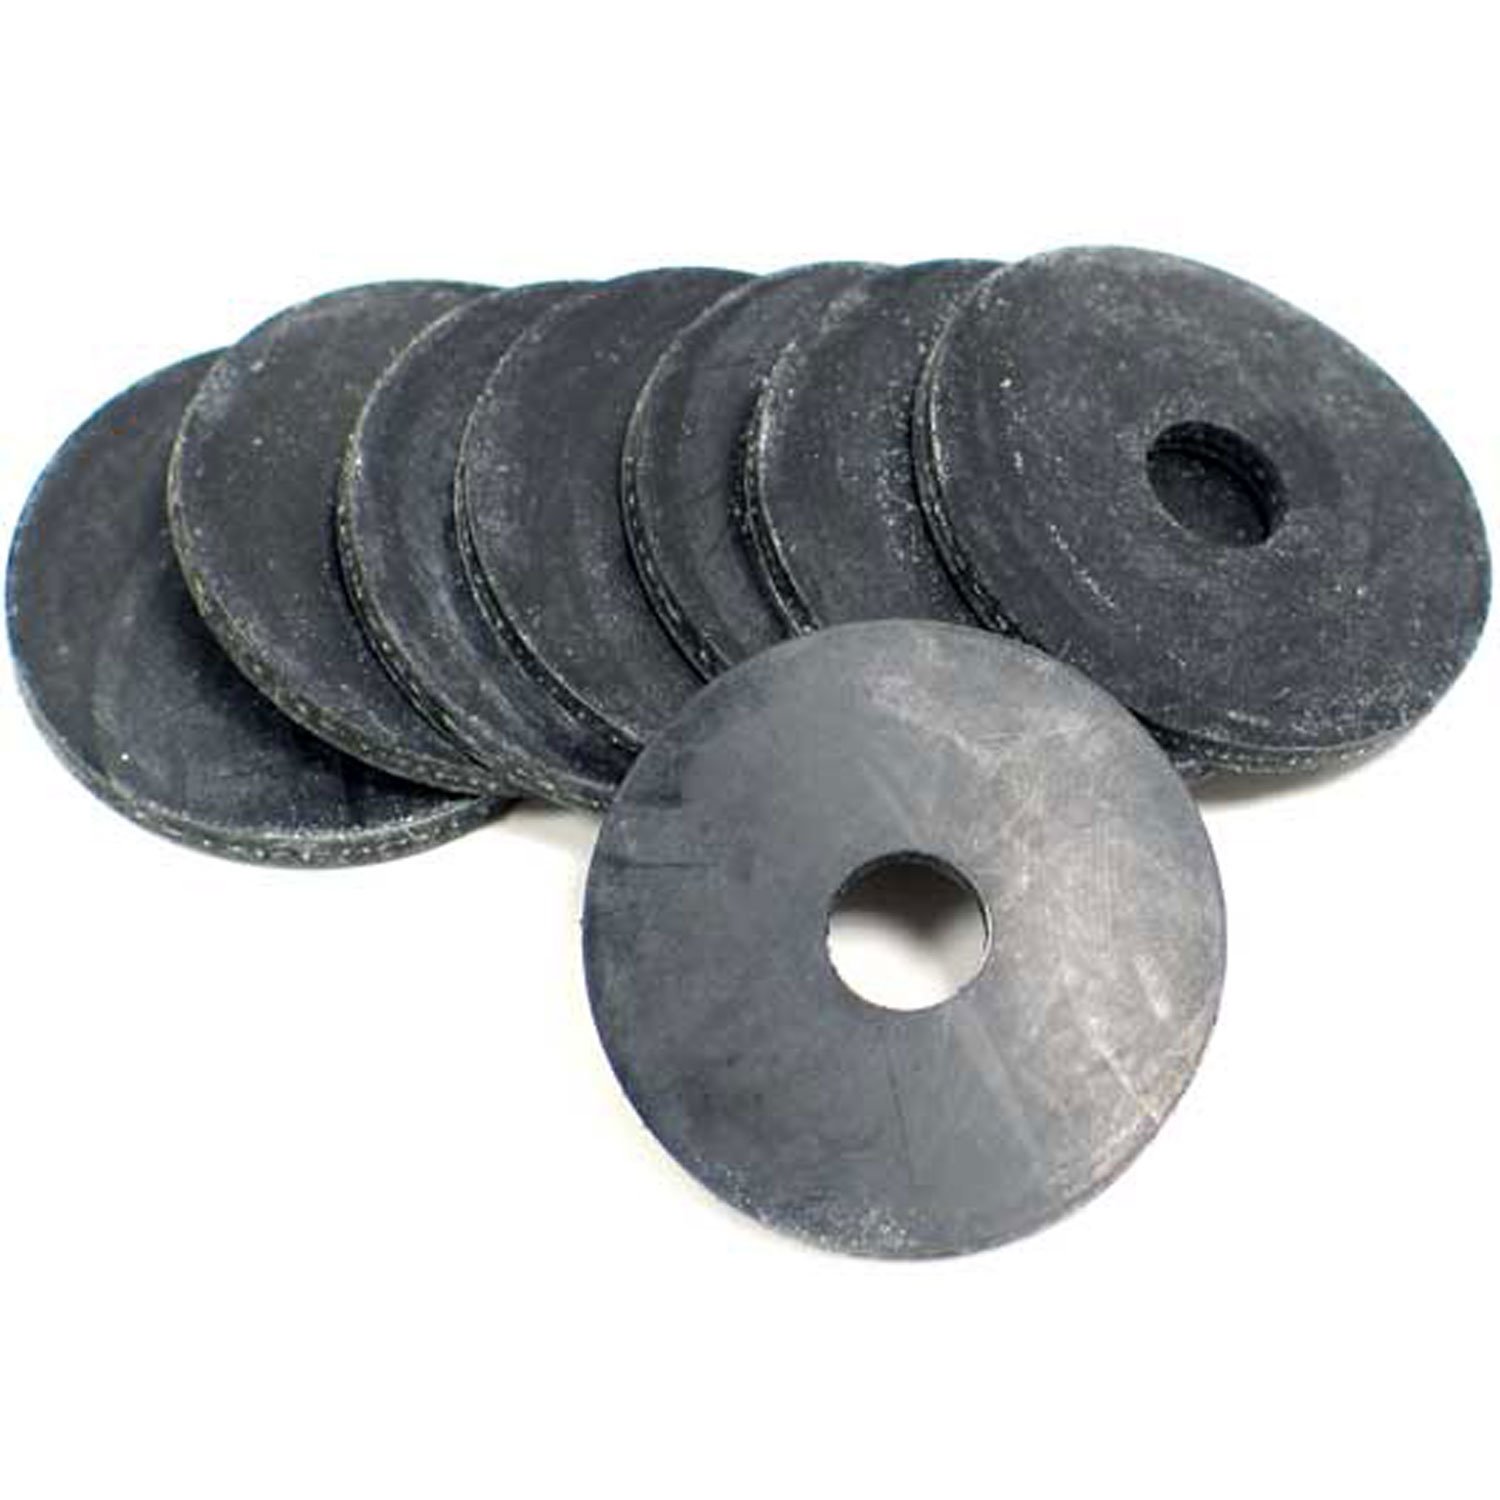 Reinforced Rubber Washers 1/8